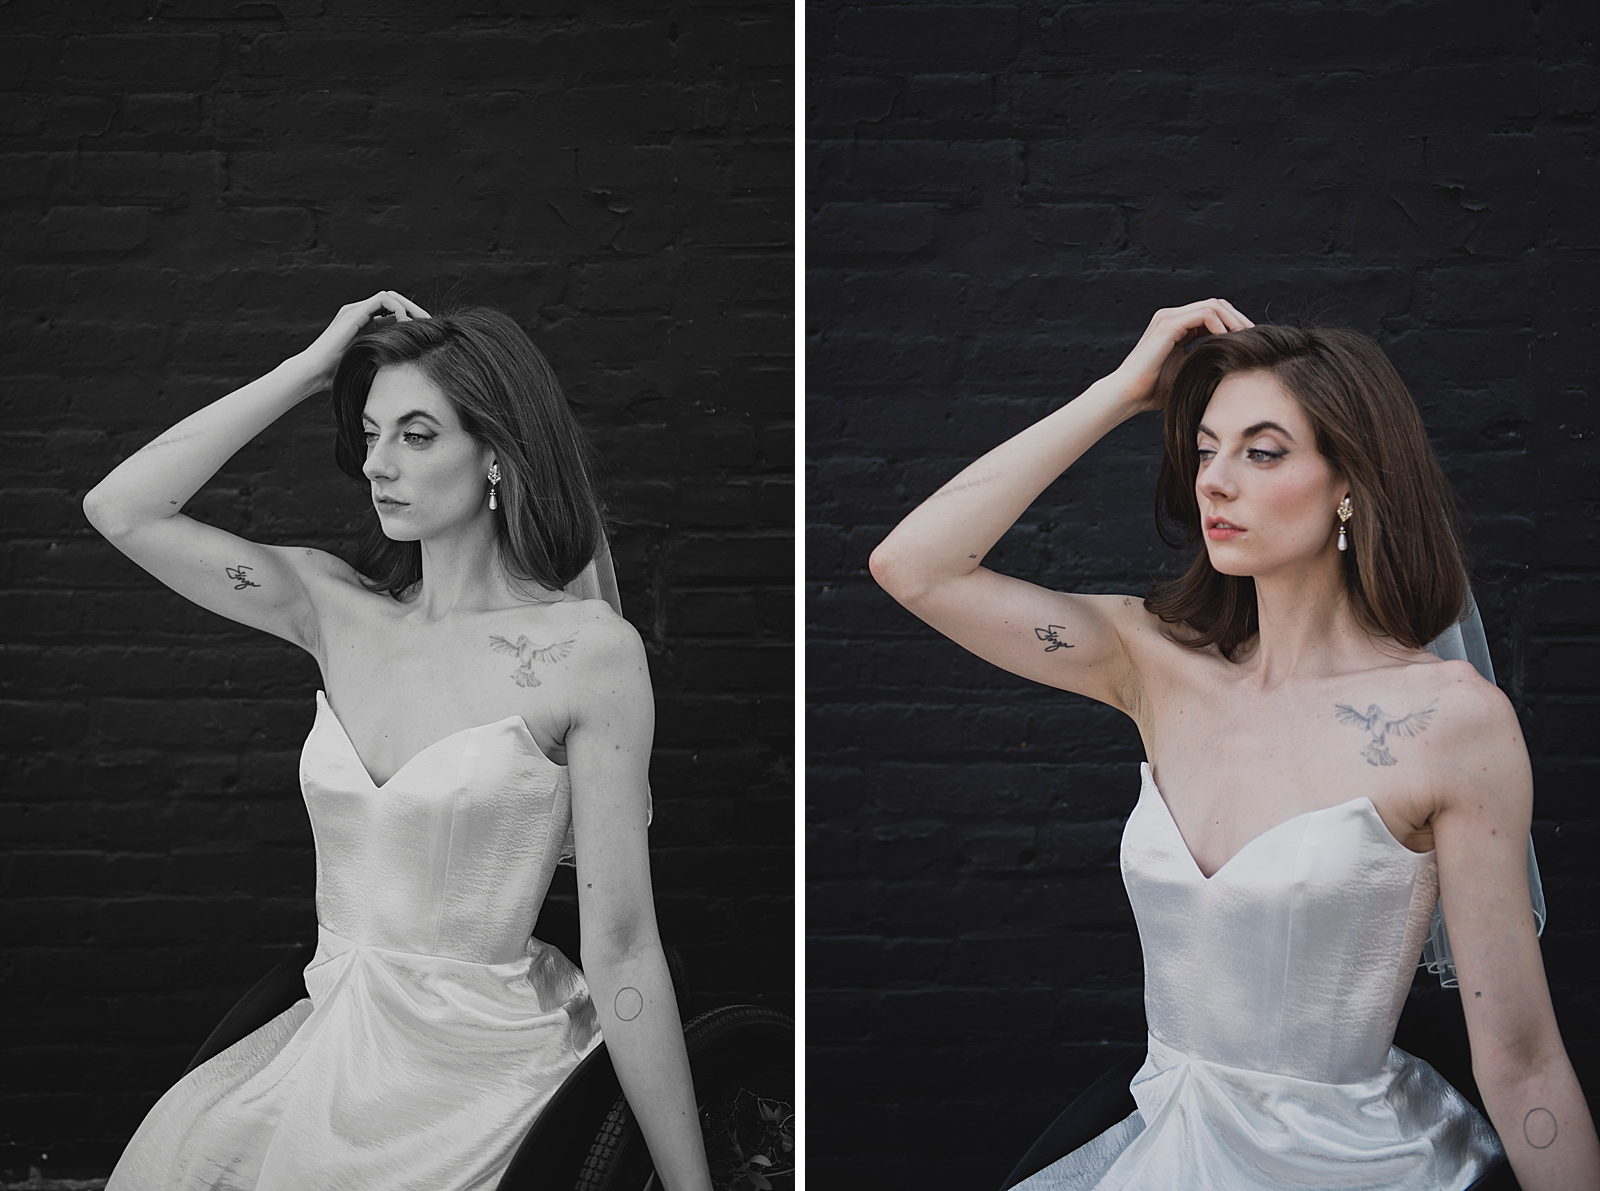 Left photo: Black and white upper body shot of the bride posing in front of a black brick wall. 
Right photo: Upper body shot of the bride posing in front of a black brick wall.